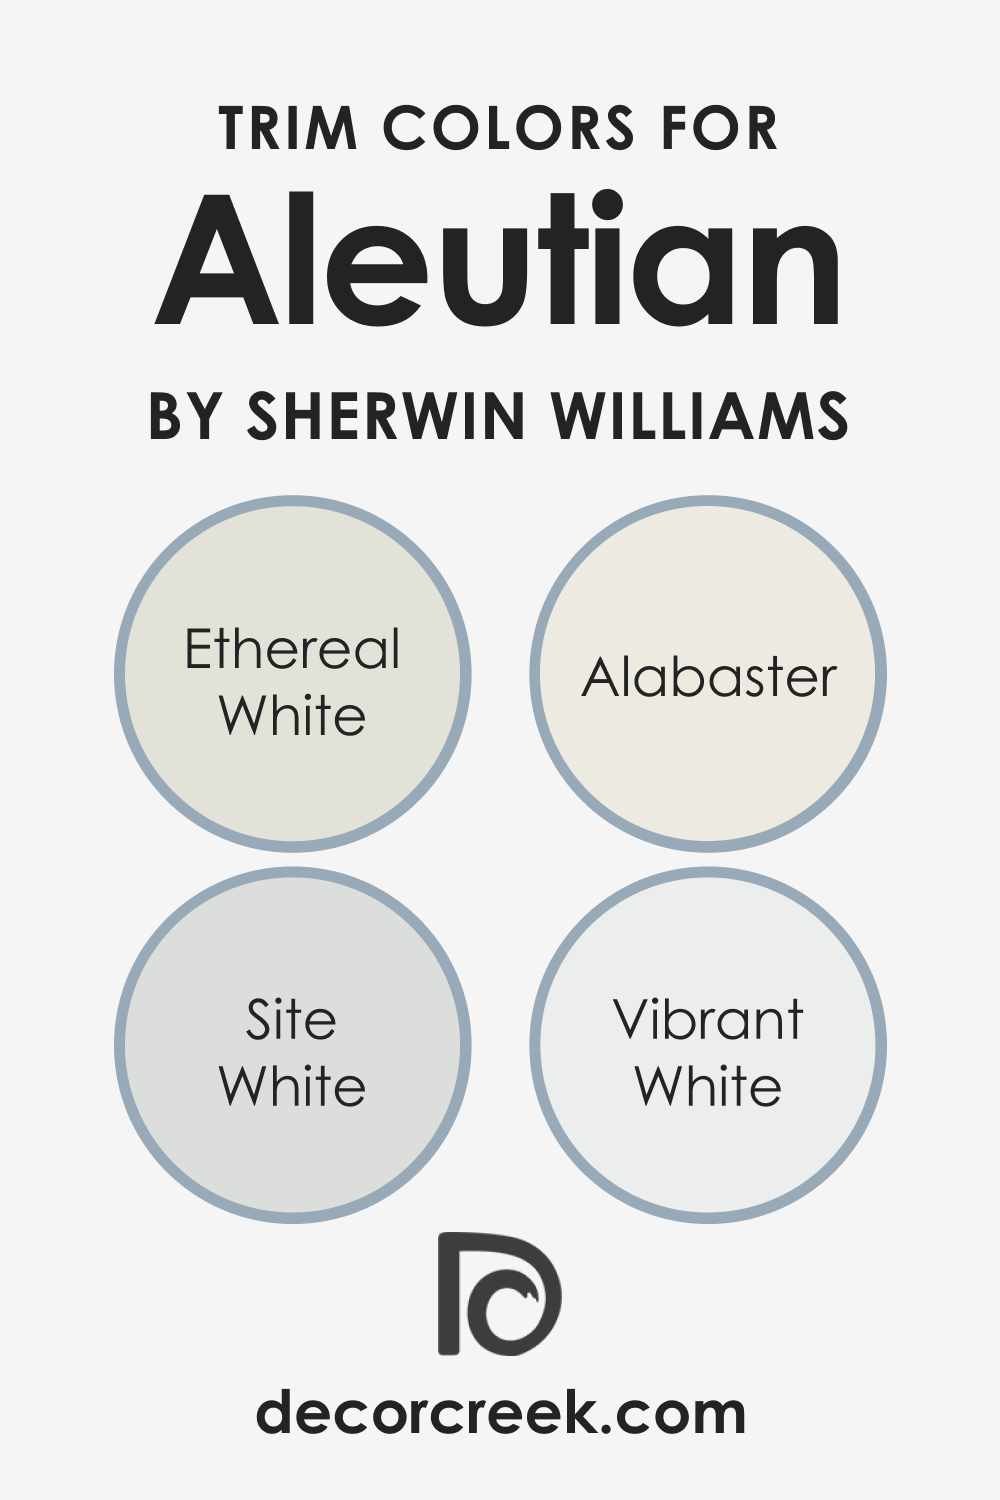 What Is the Best Trim Color to Use With SW Aleutian?